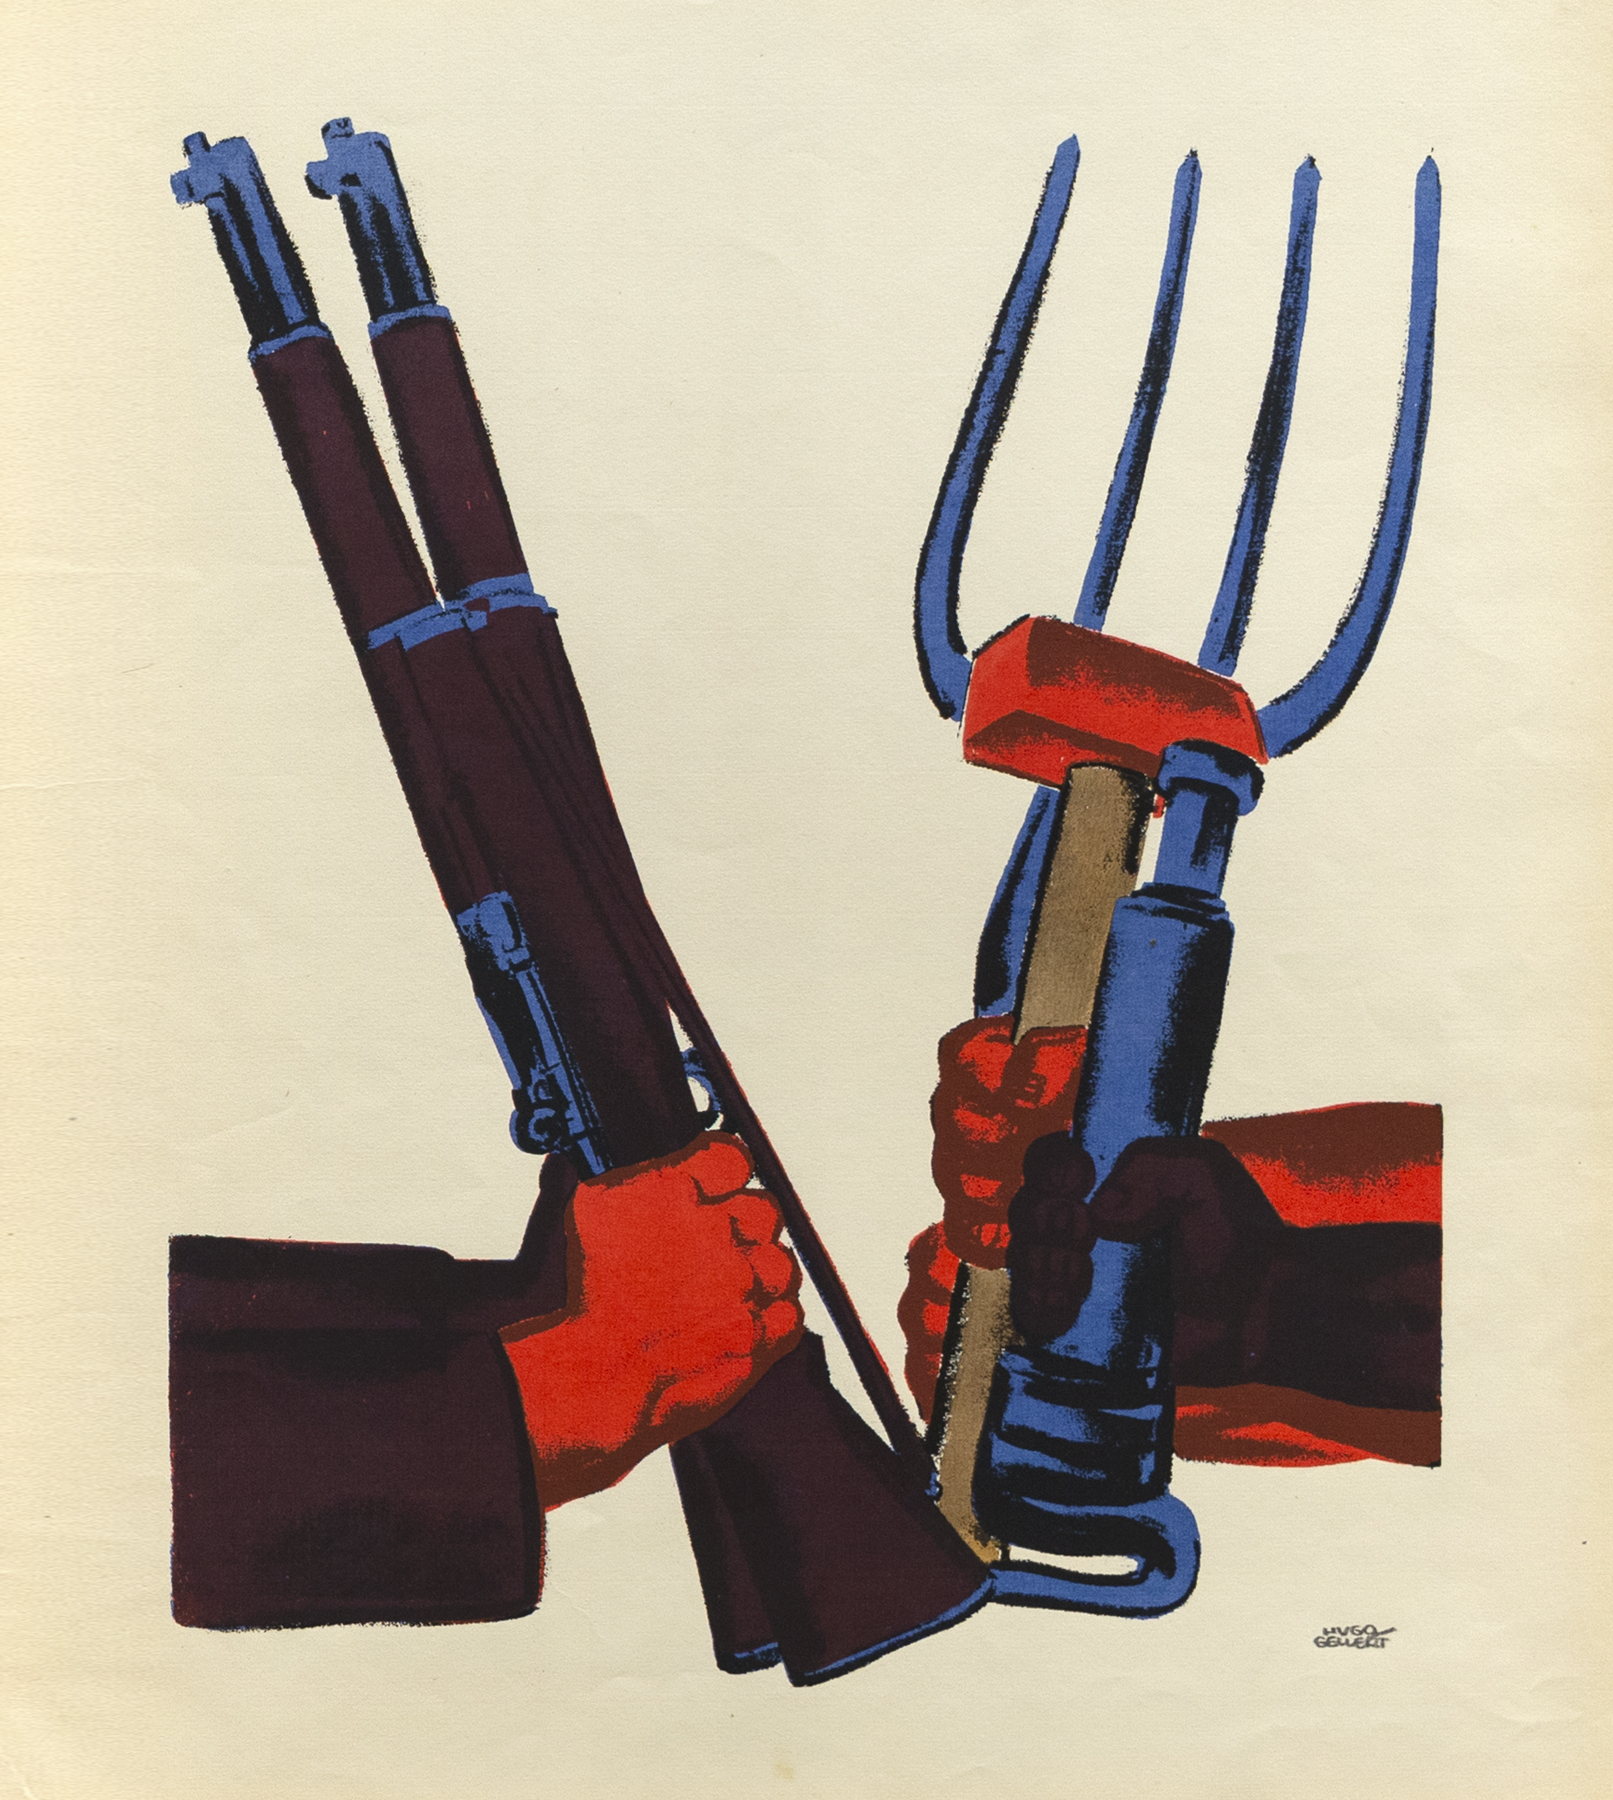 Untitled, 1943, Silkscreen, 16 x 13 inches (40.6 x 33 cm), Edition of 54